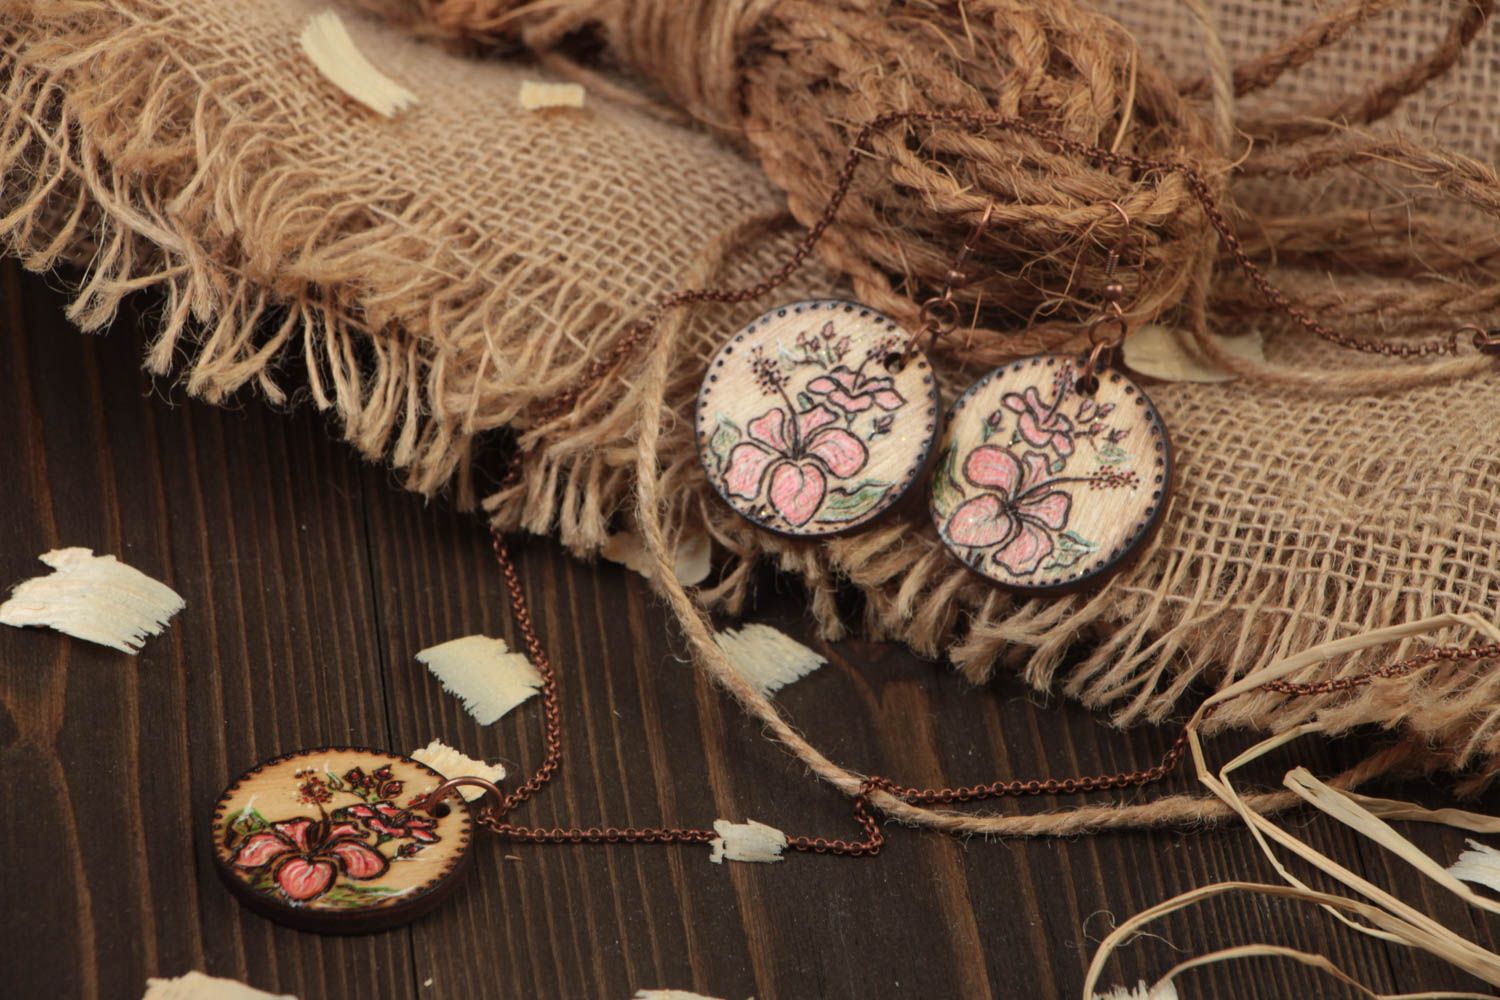 Handmade ethnic accessories earrings with charms pendant on chain wooden jewelry photo 1